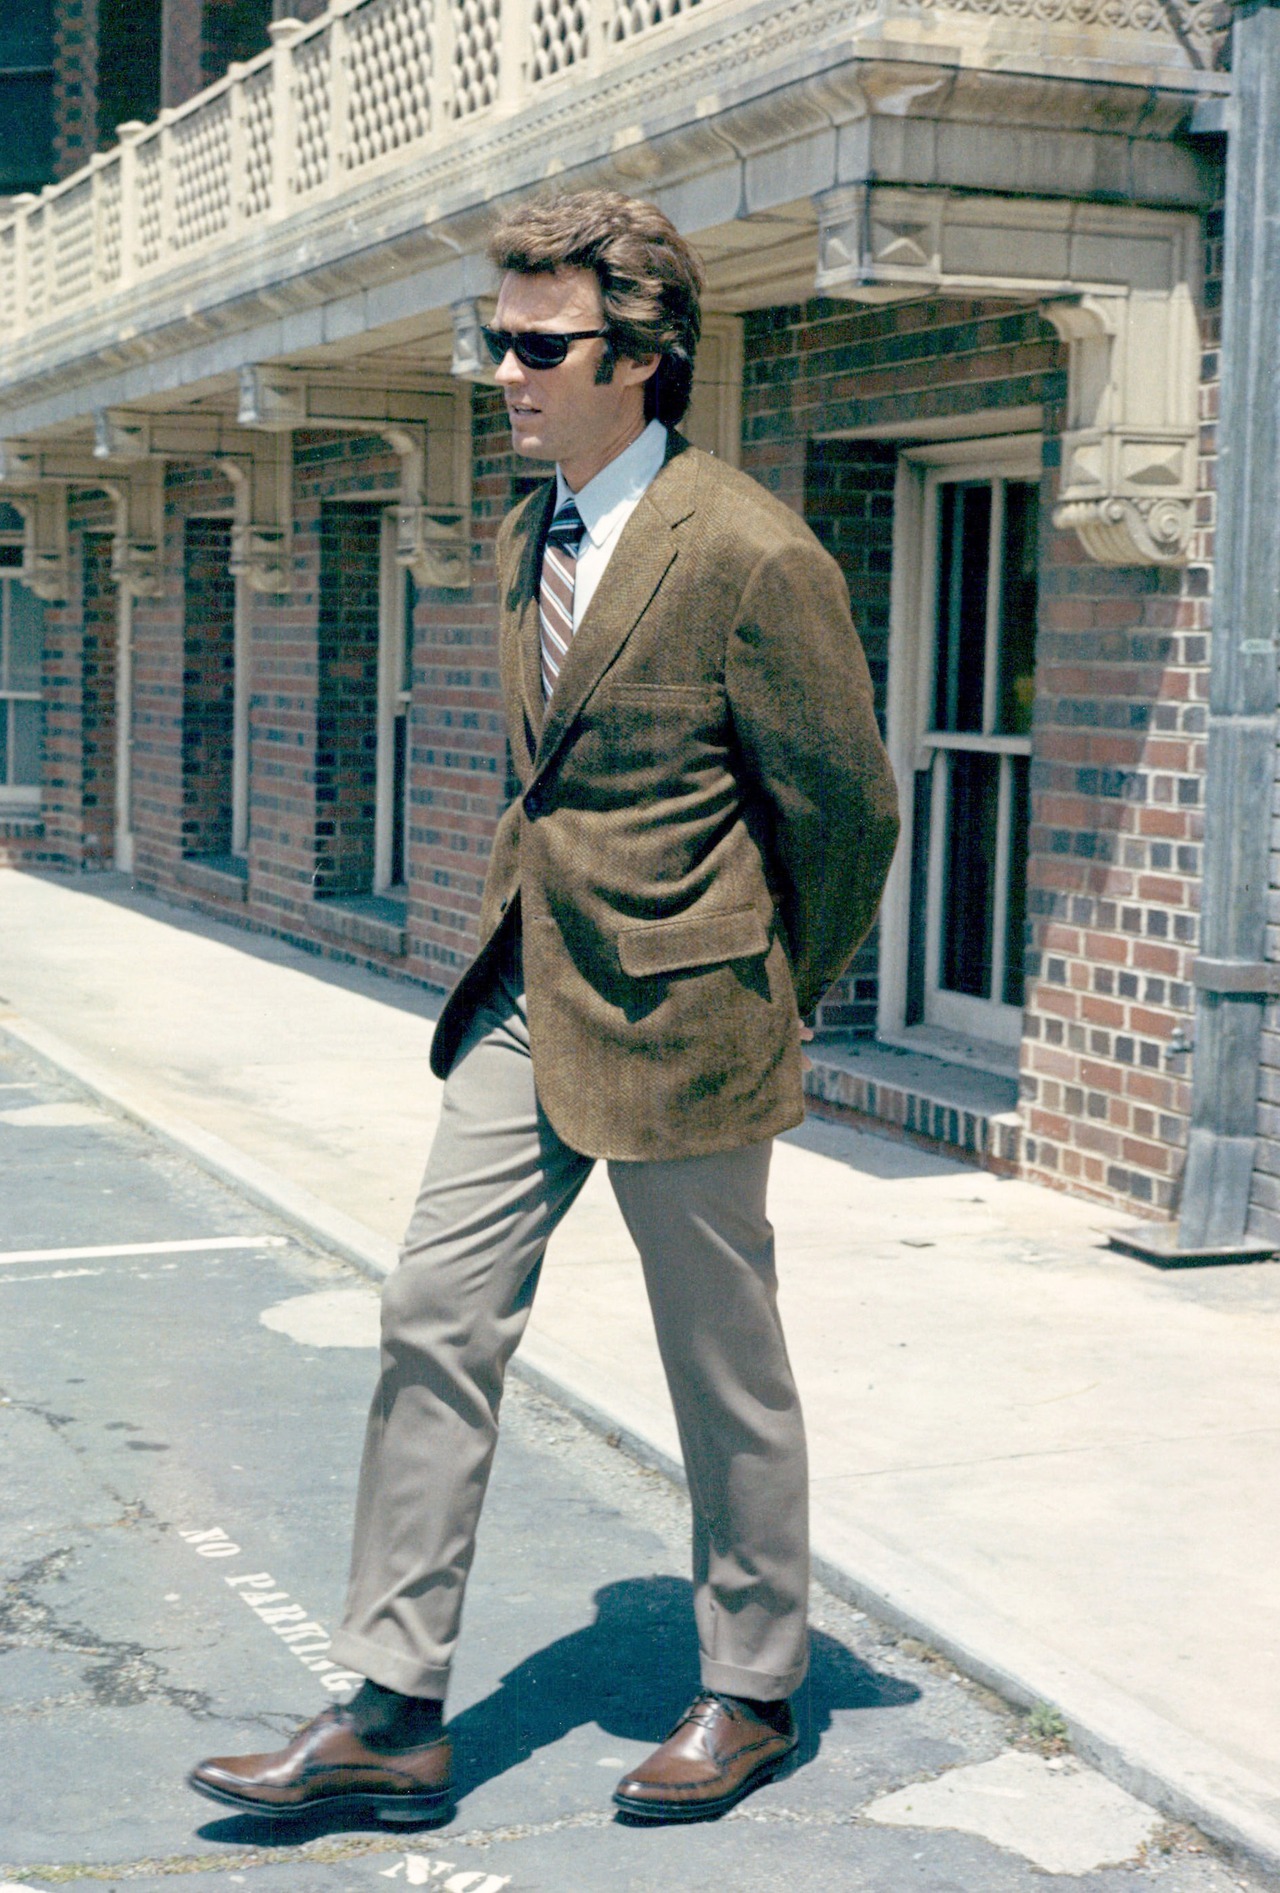 Clint on the set of Dirty Harry (1971)